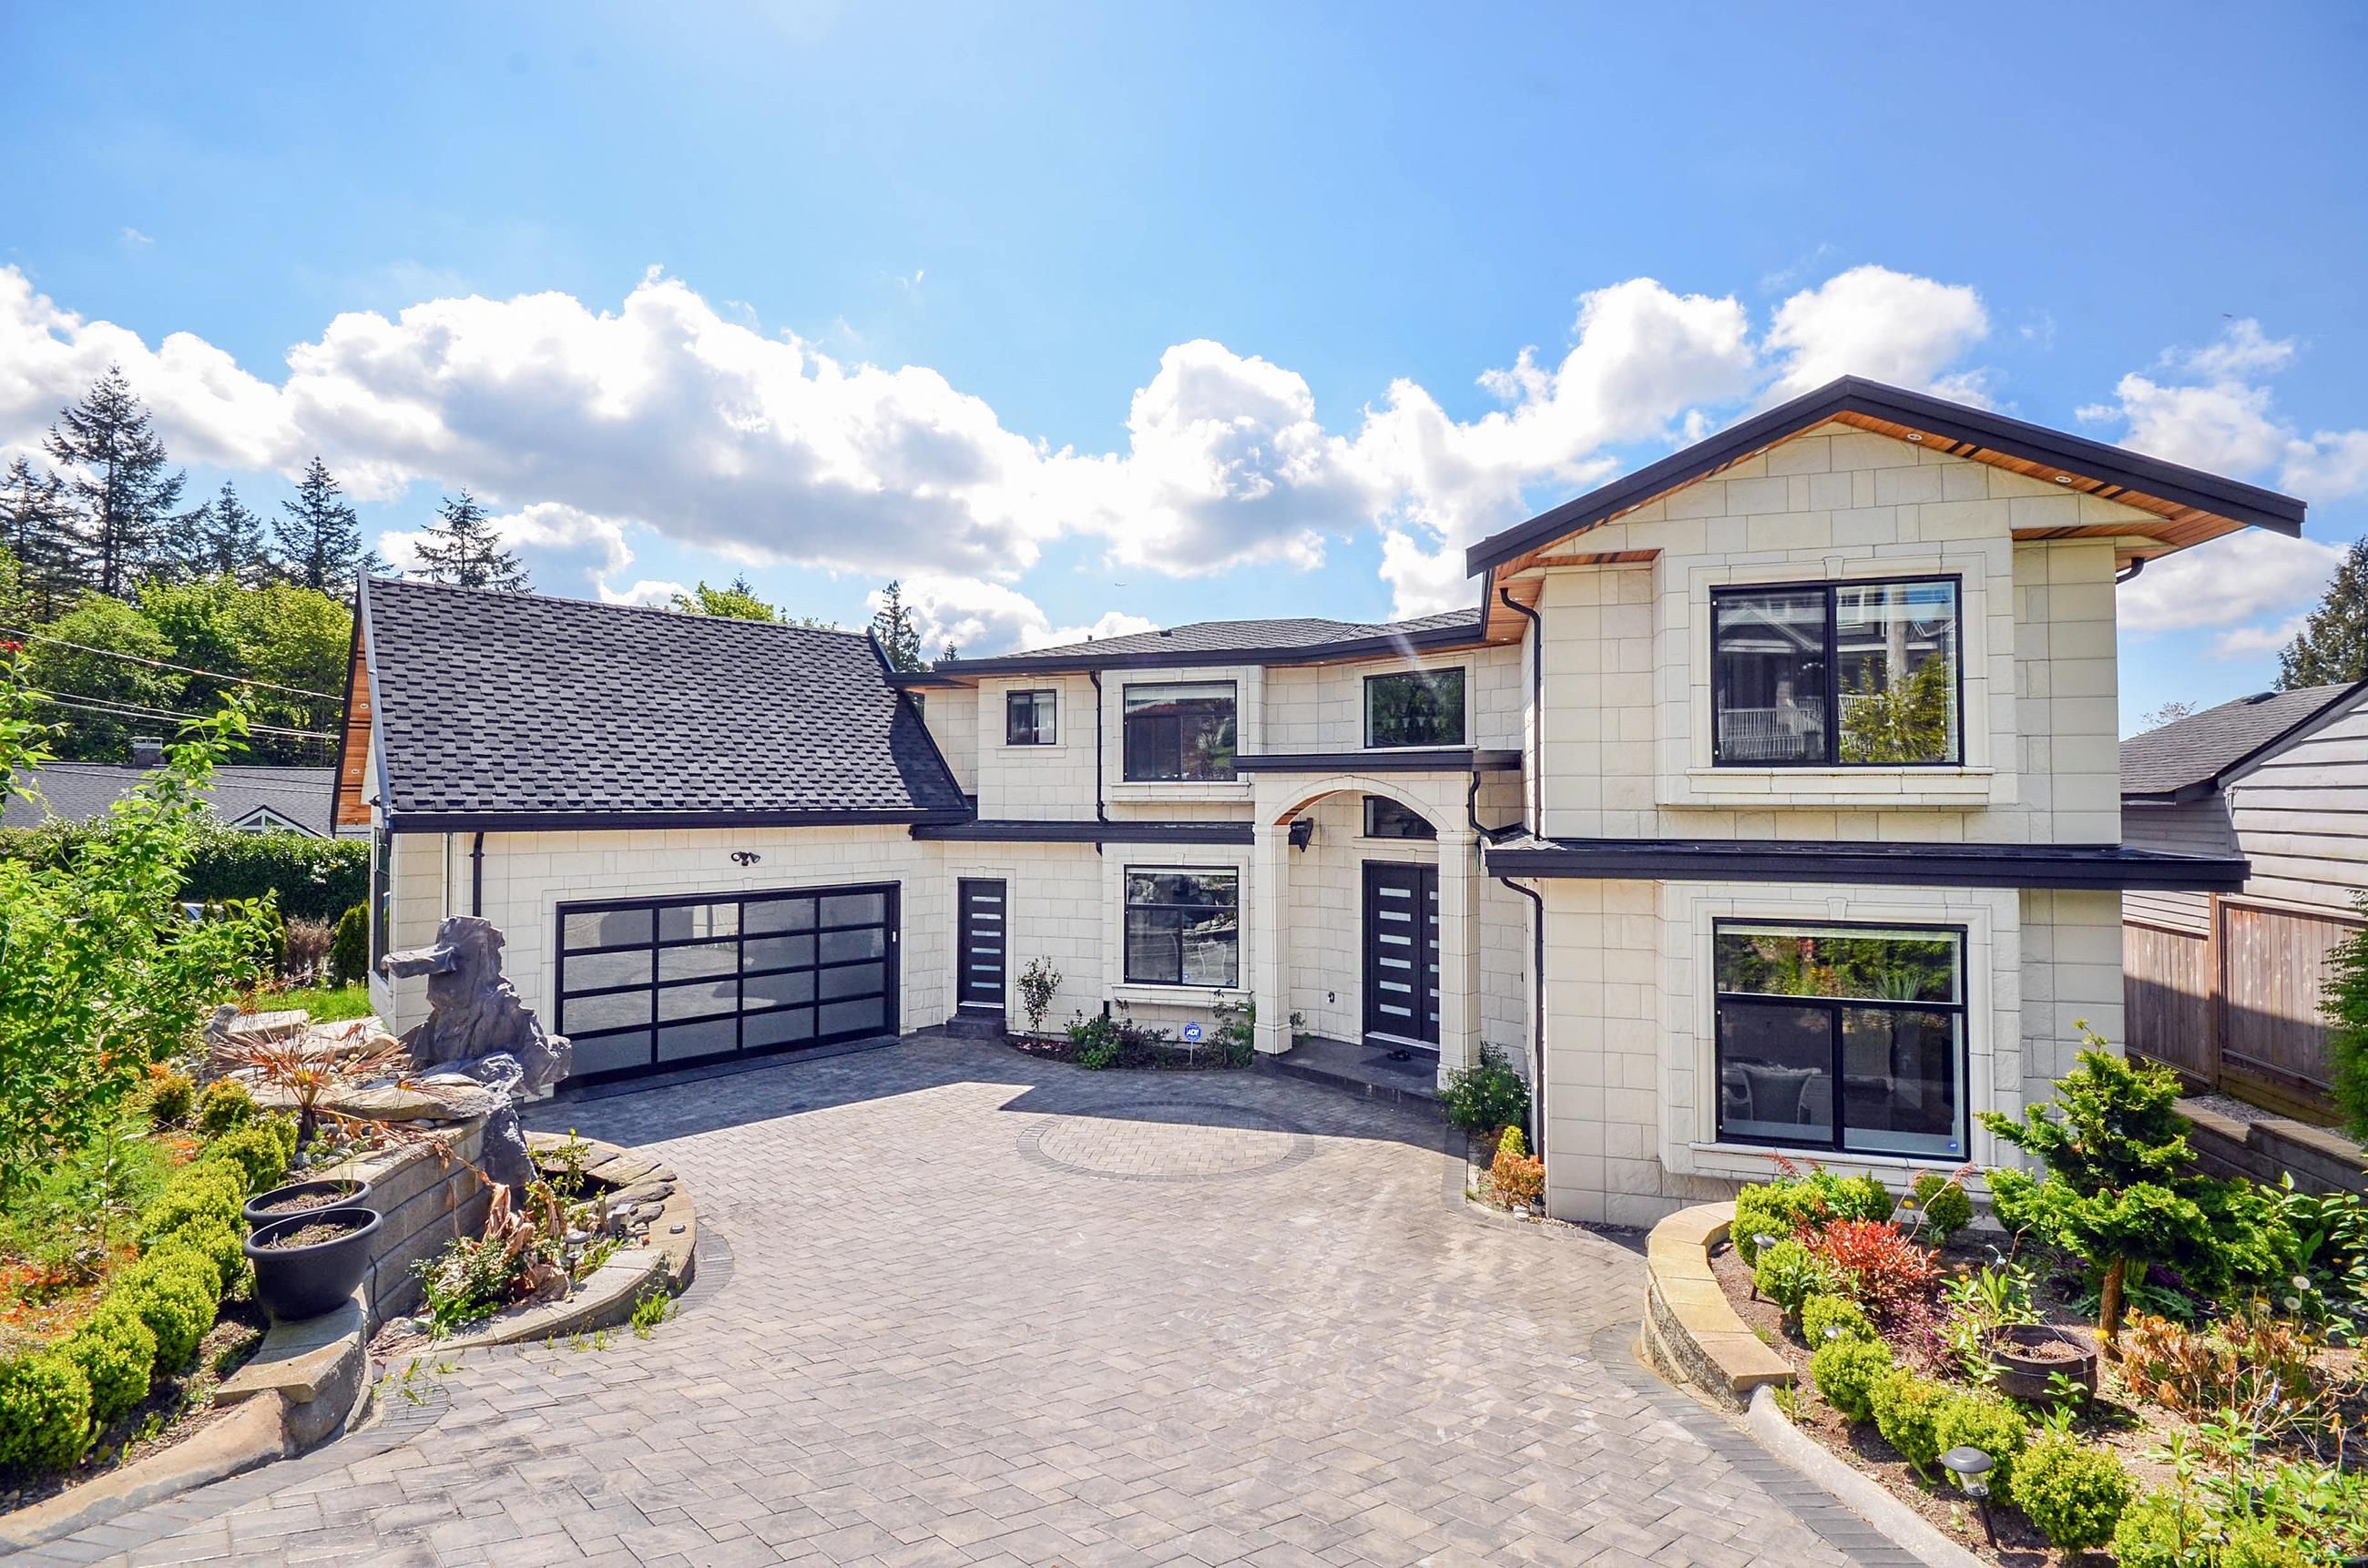 New property listed in South Slope, Burnaby South